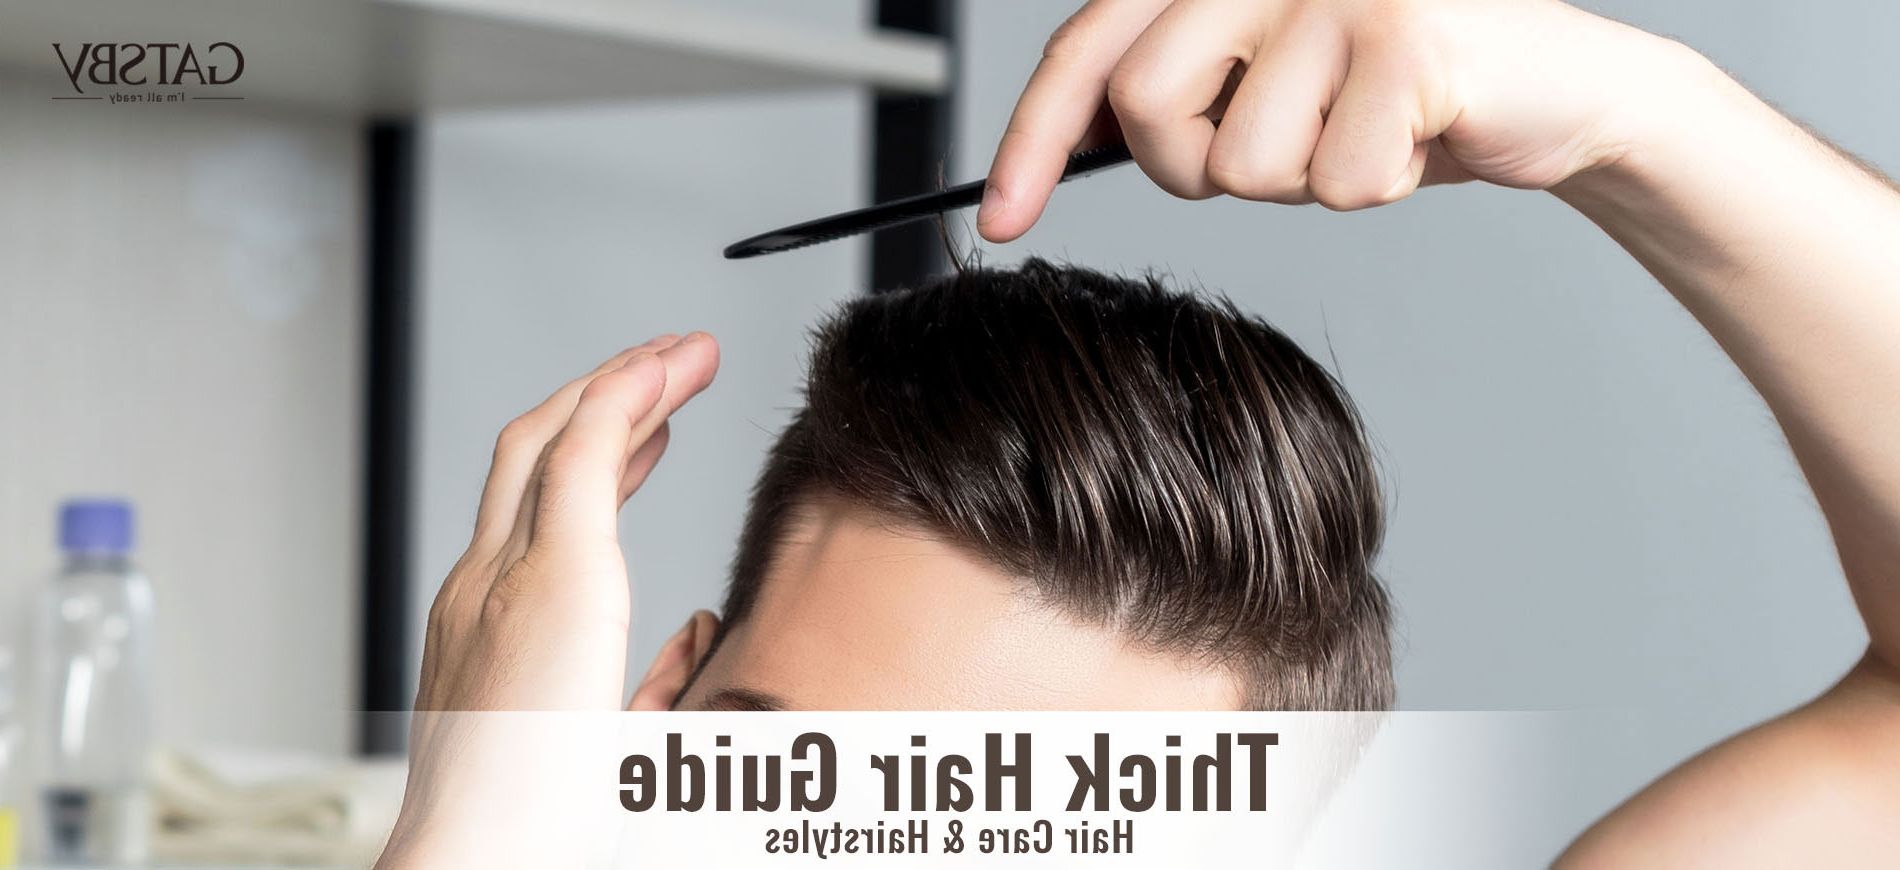 Thick Hair Guide For Mengatsby: Hair Care & Hairstyles Intended For Current Textured Cut For Thick Hair (View 19 of 20)